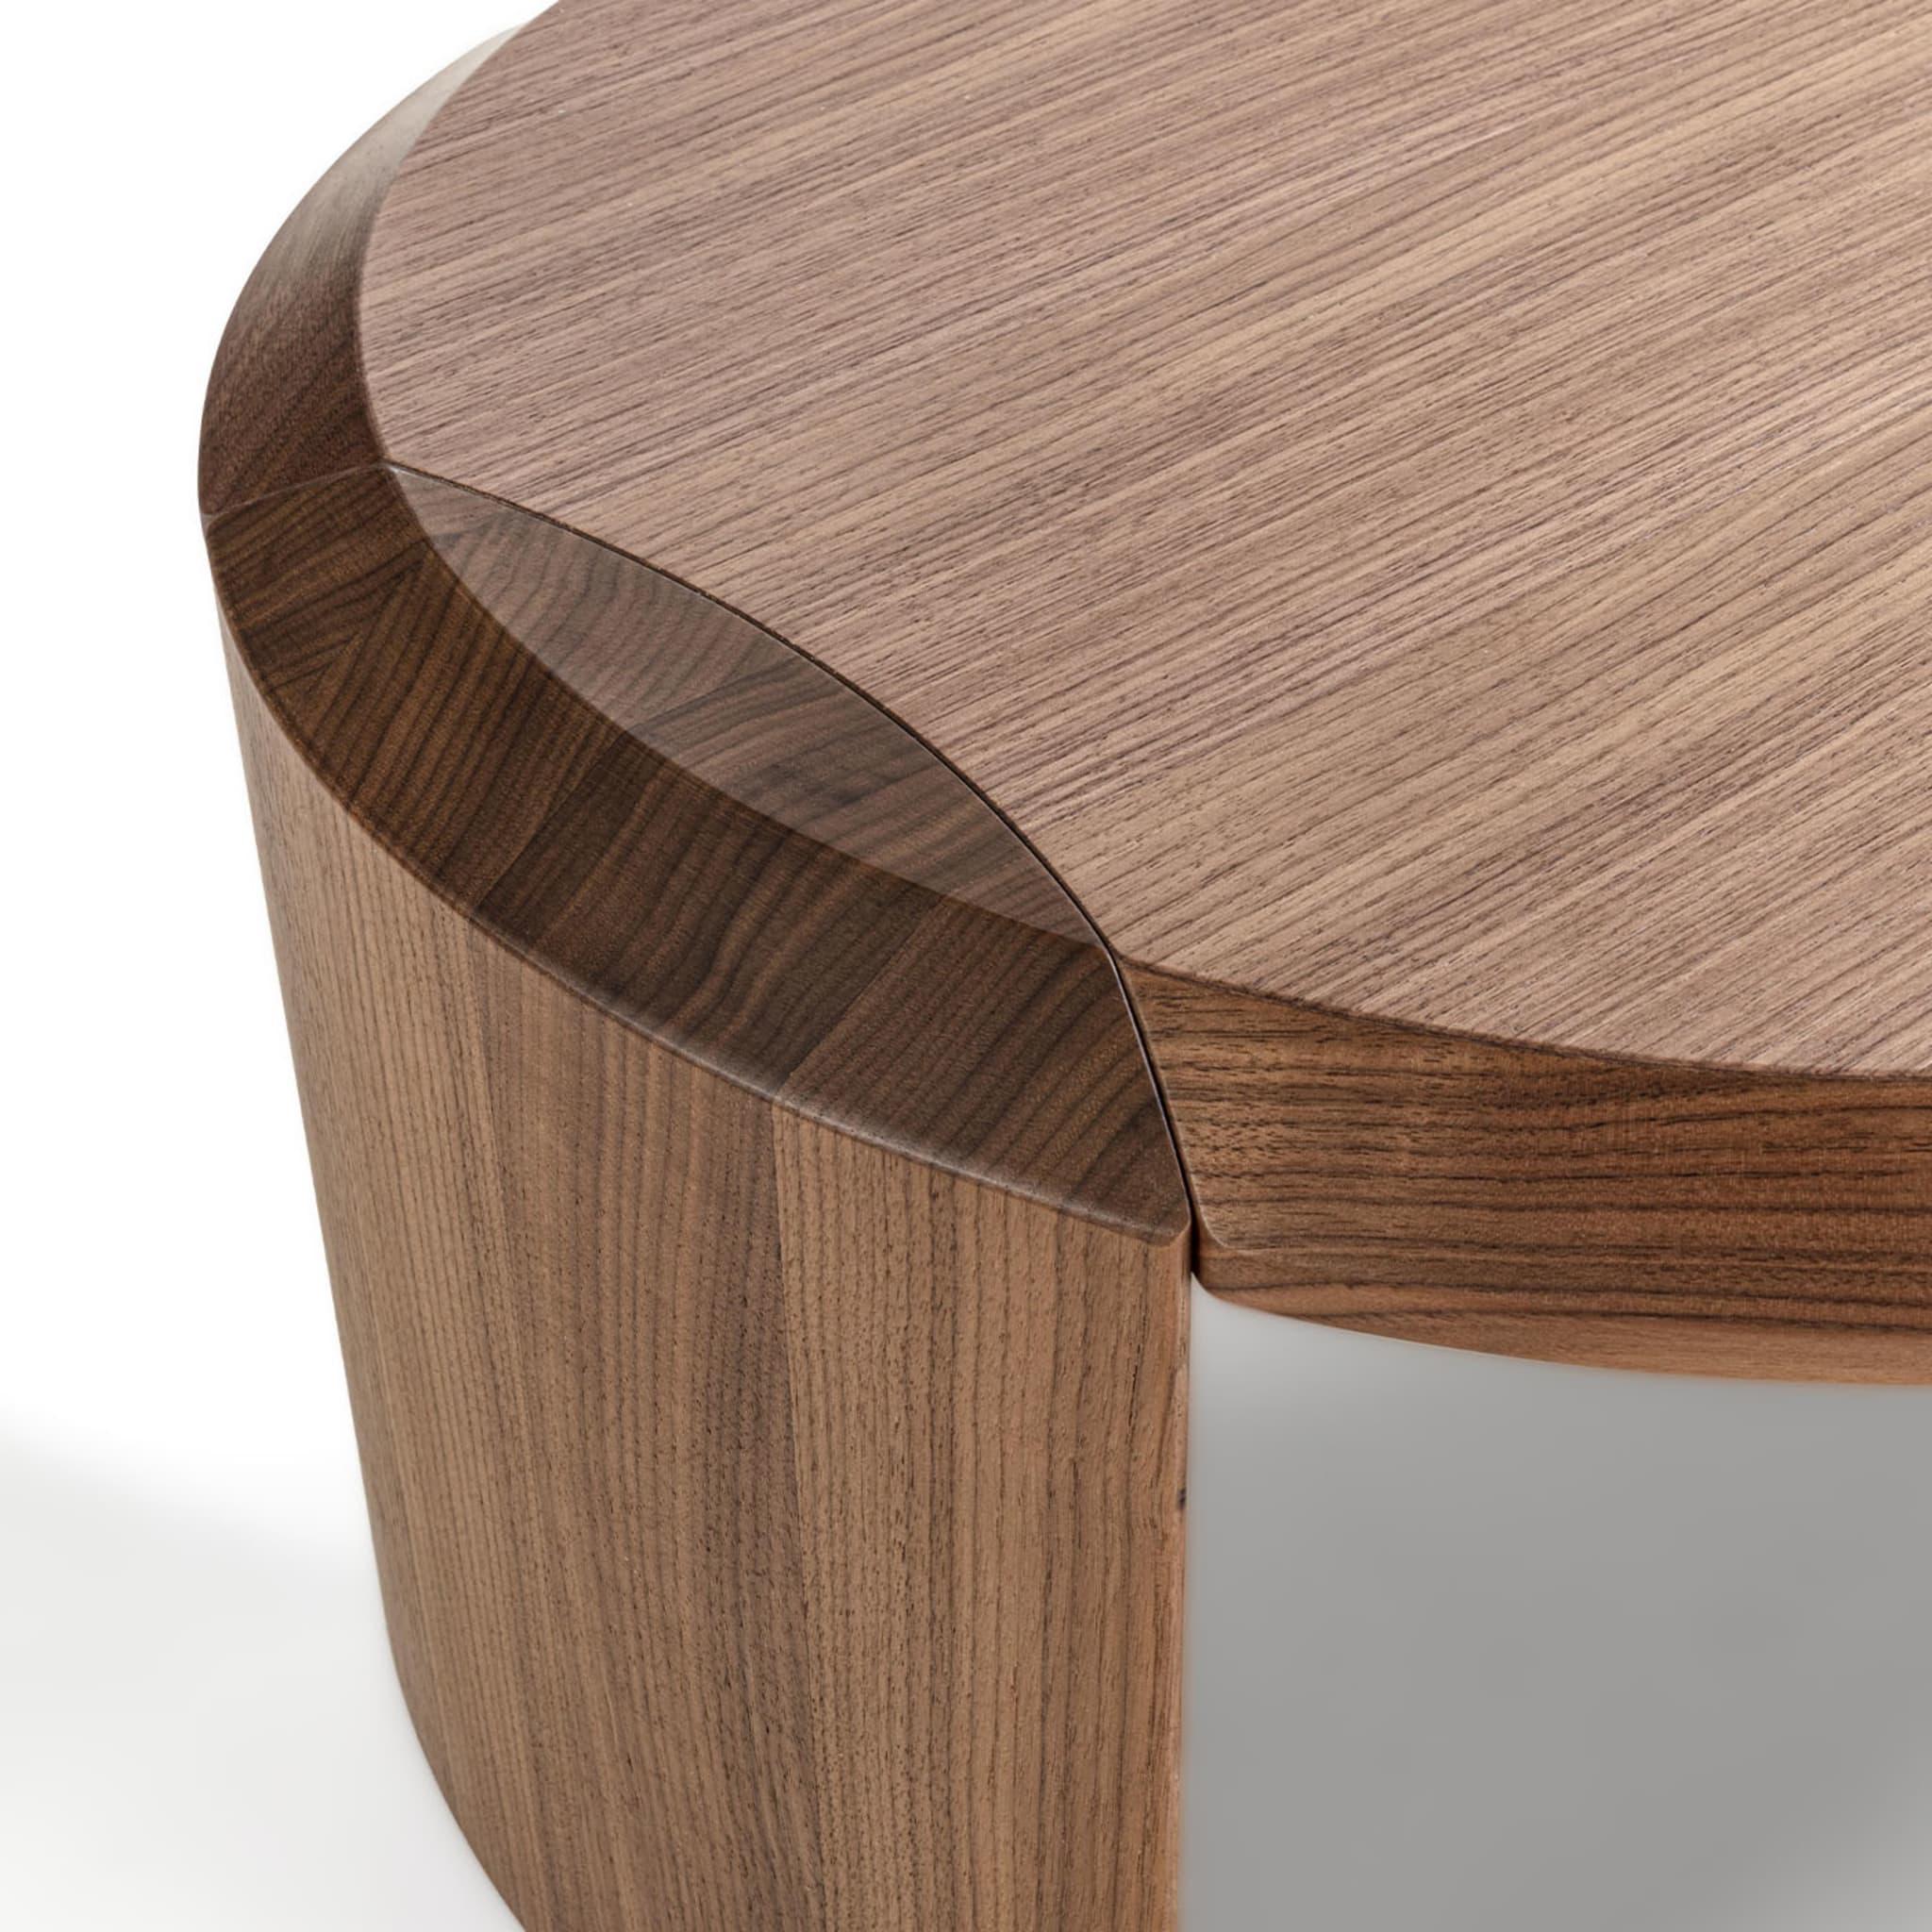 Captivating curves outline this sleek and welcoming design, fashioned of Canaletto walnut and indeed flaunting warm, unrepeatable grain. A distinguishing feature of the whole Bellagio series is the elegant joint that allows for the top and